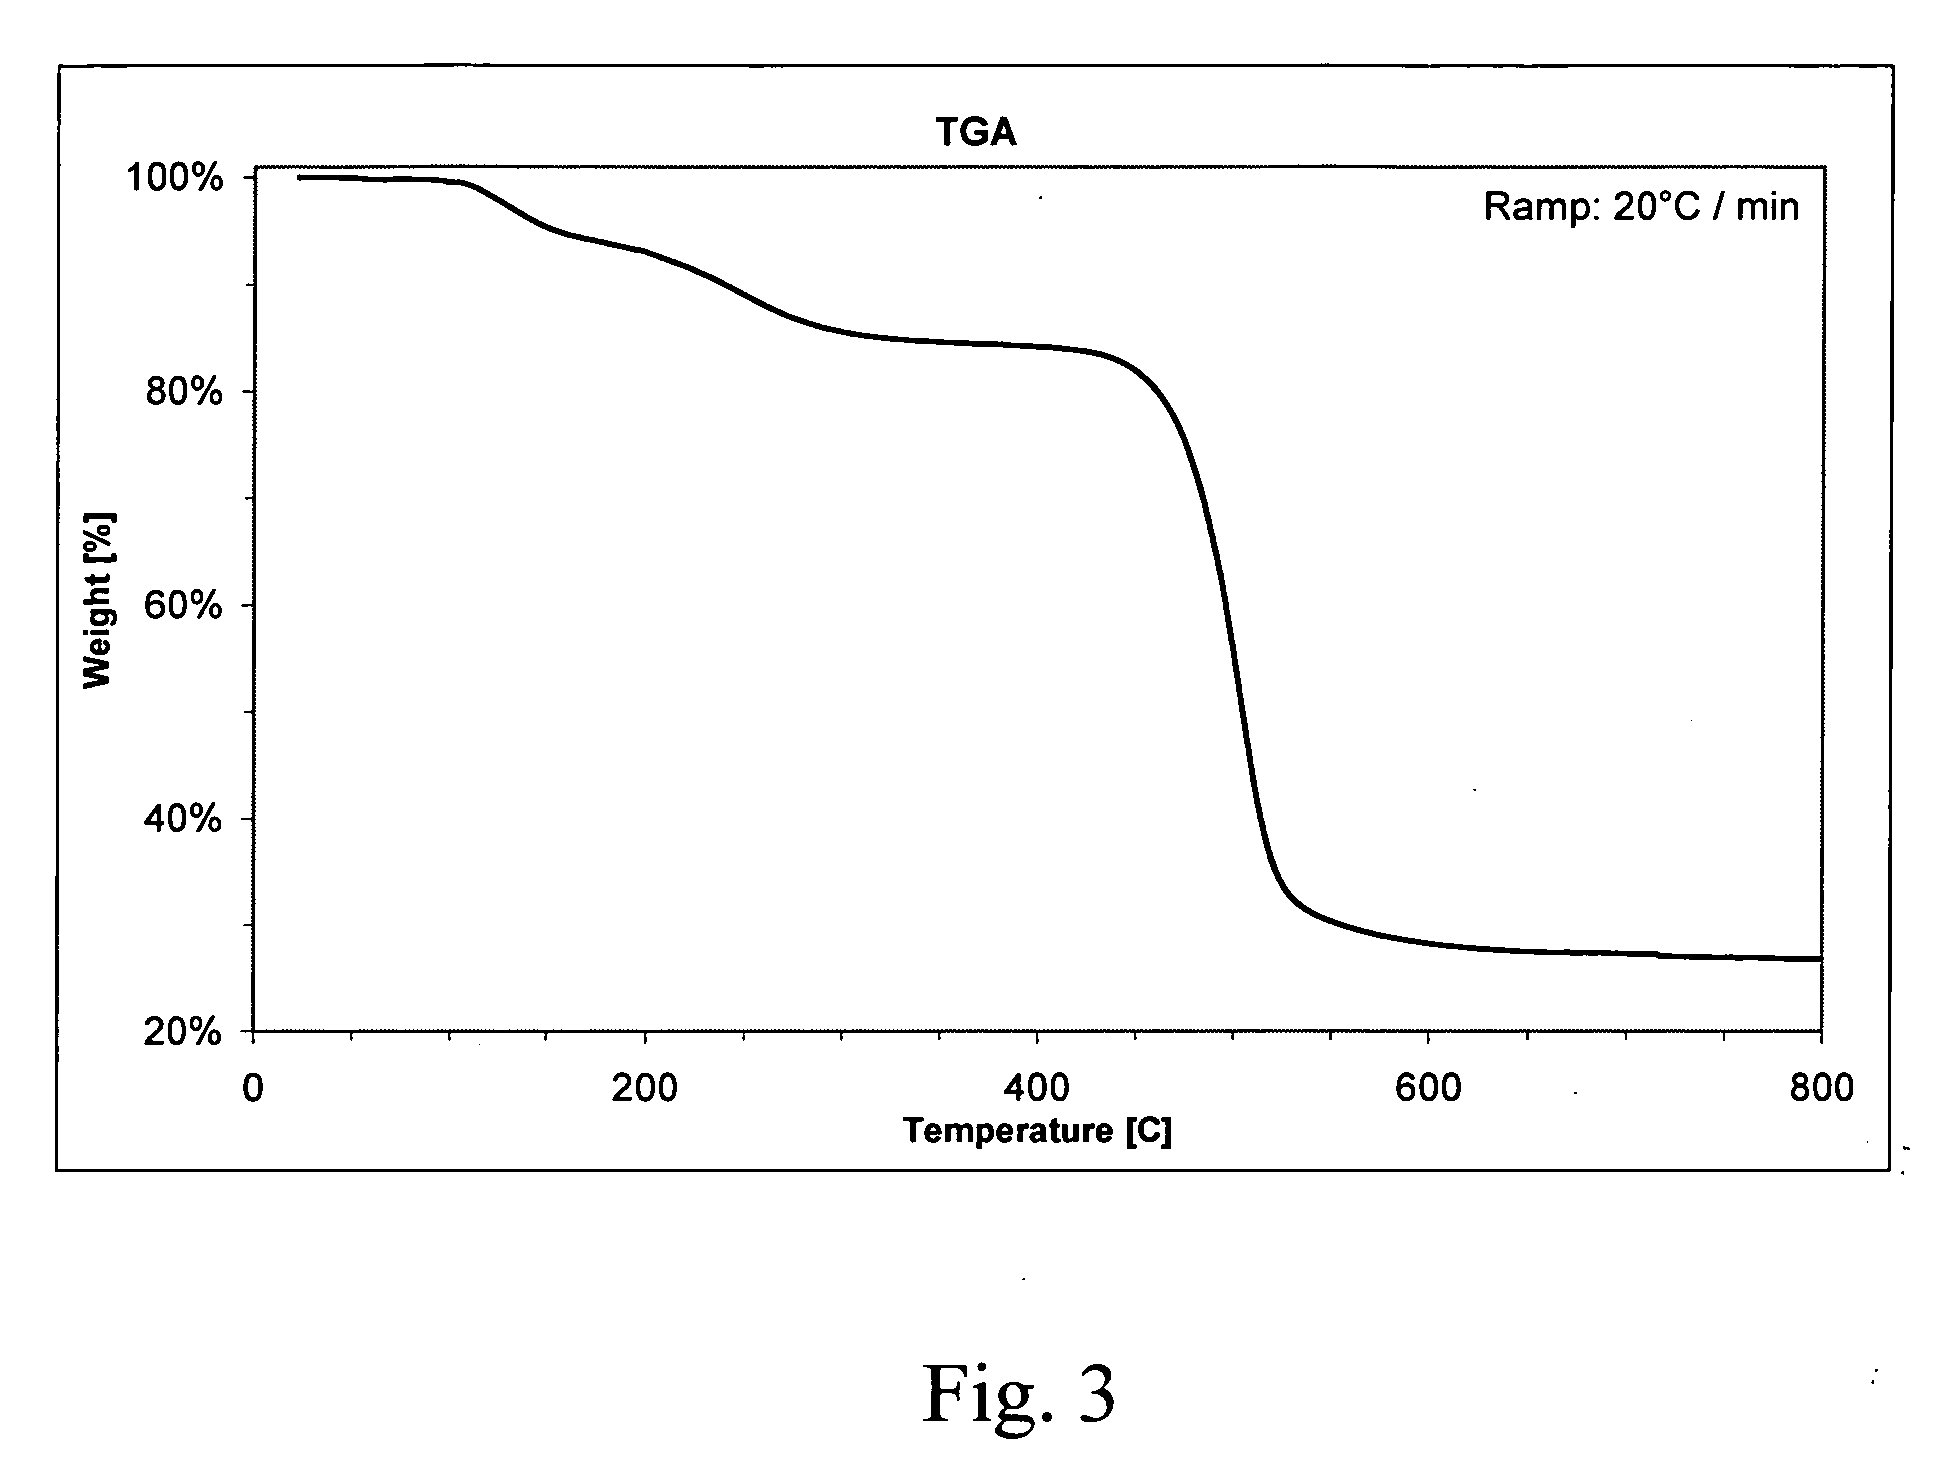 Semiconductor optoelectronics devices